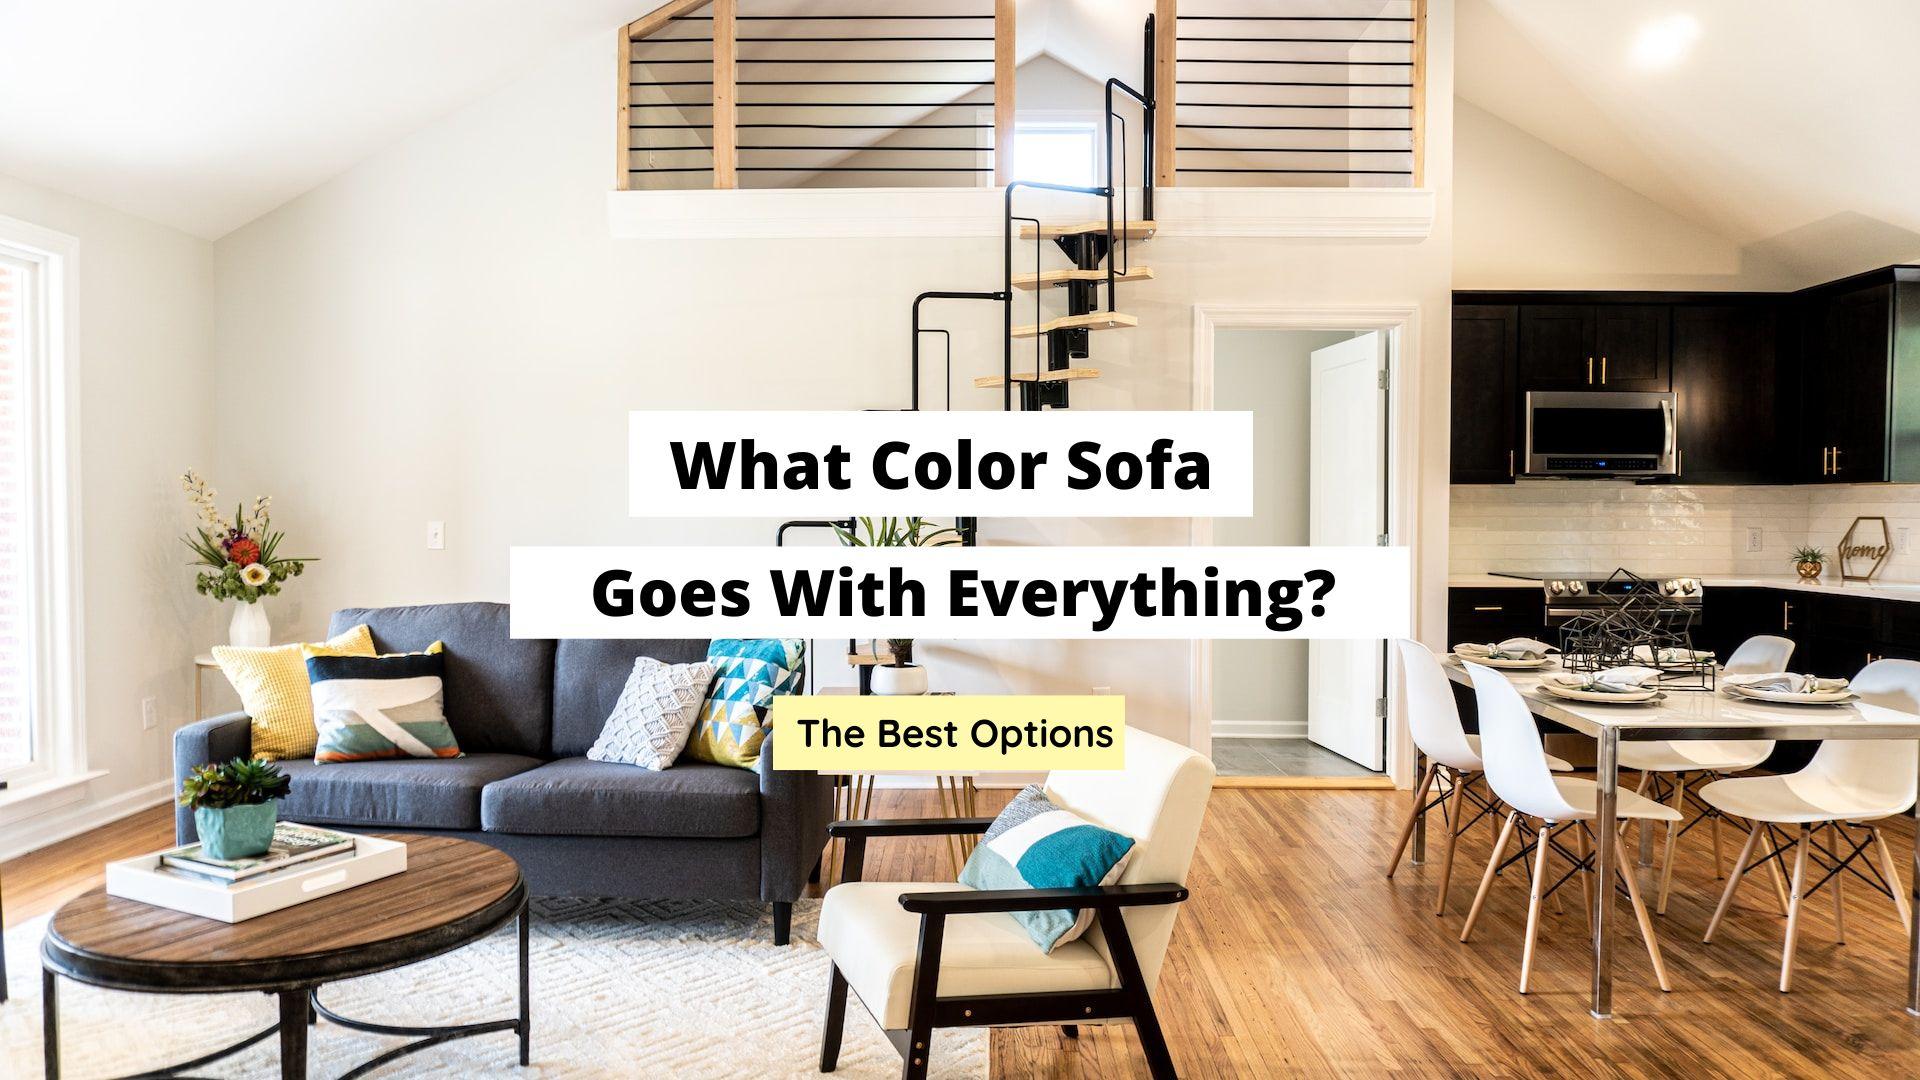 What Color Sofa Goes With Everything